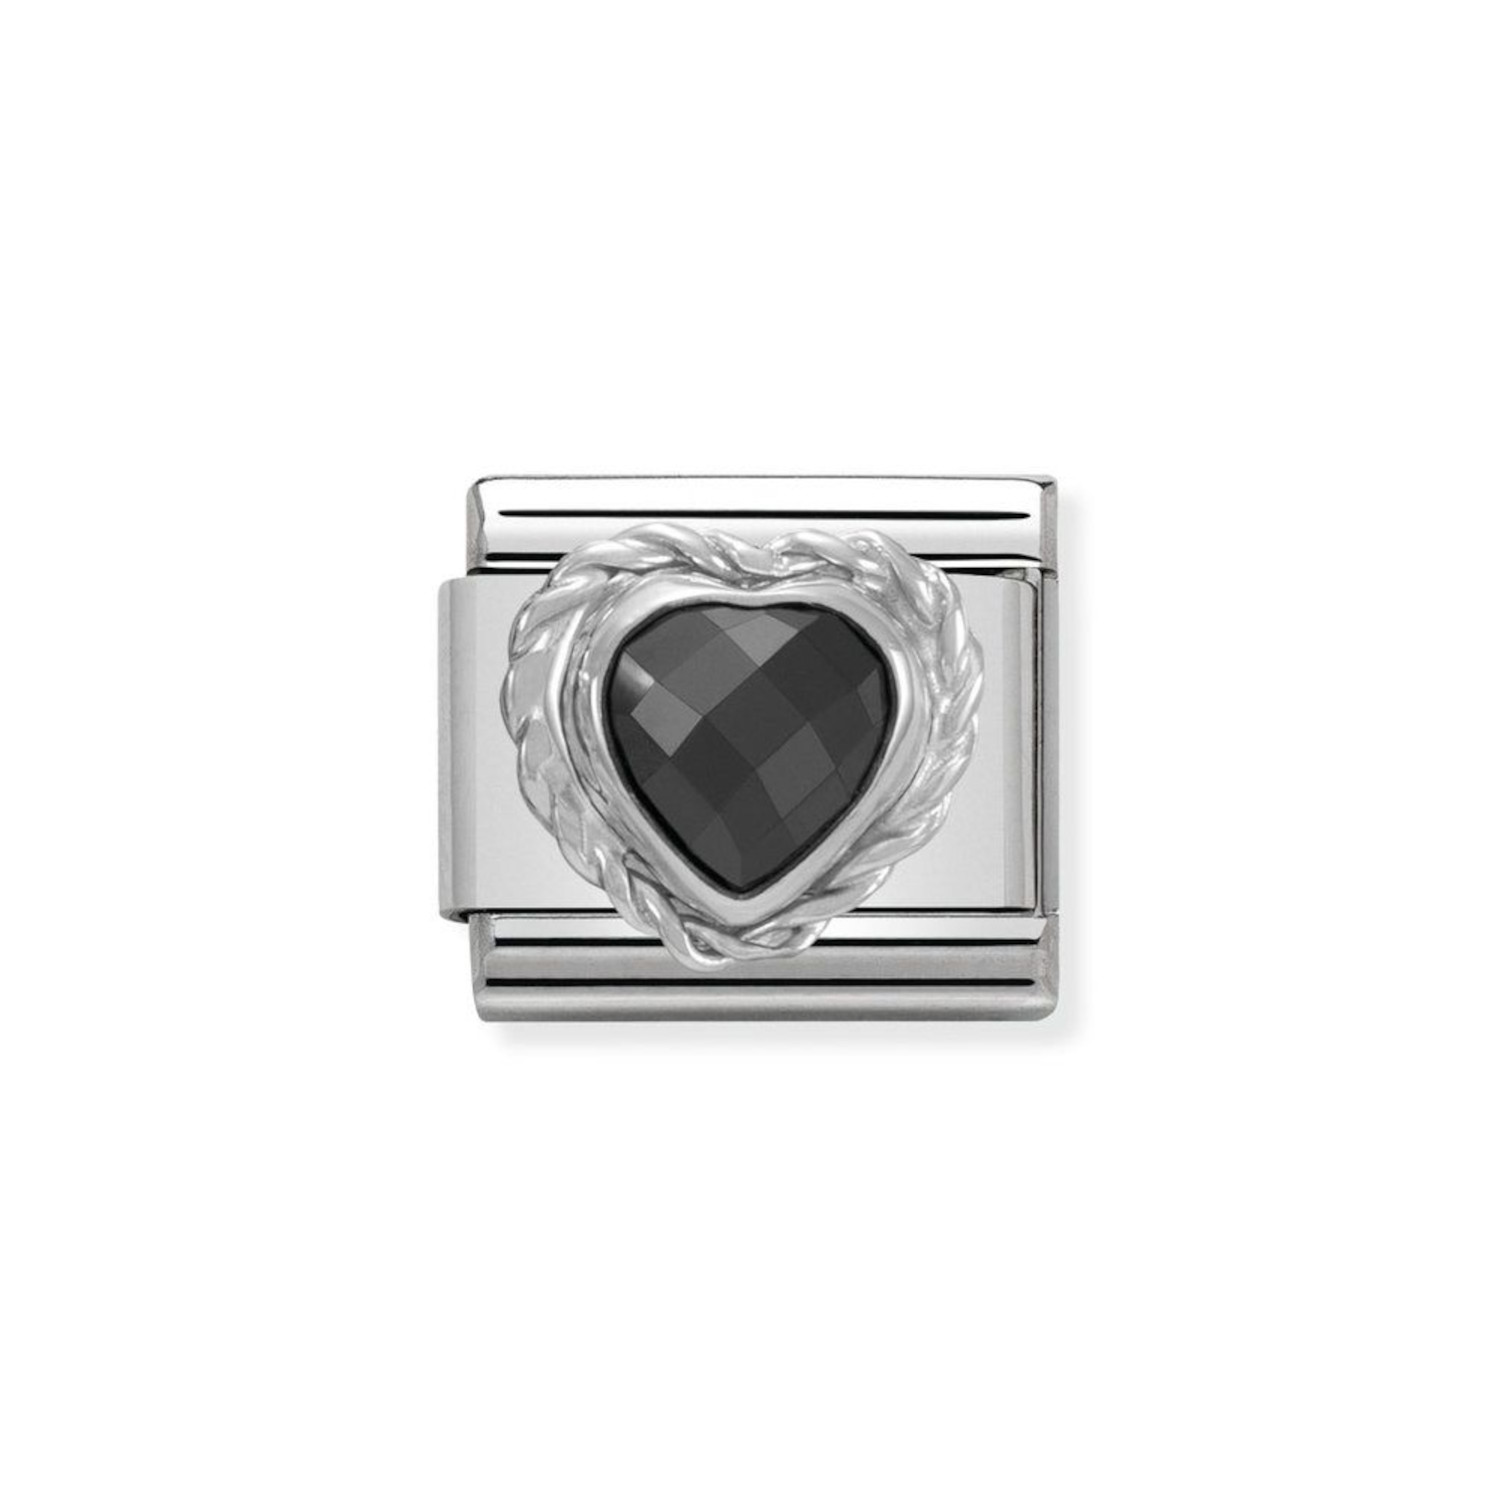 NOMINATION COMPOSABLE CLASSIC LINK IN STERLING SILVER WITH HEART-SHAPED FACETED BLACK STONE 330603/011